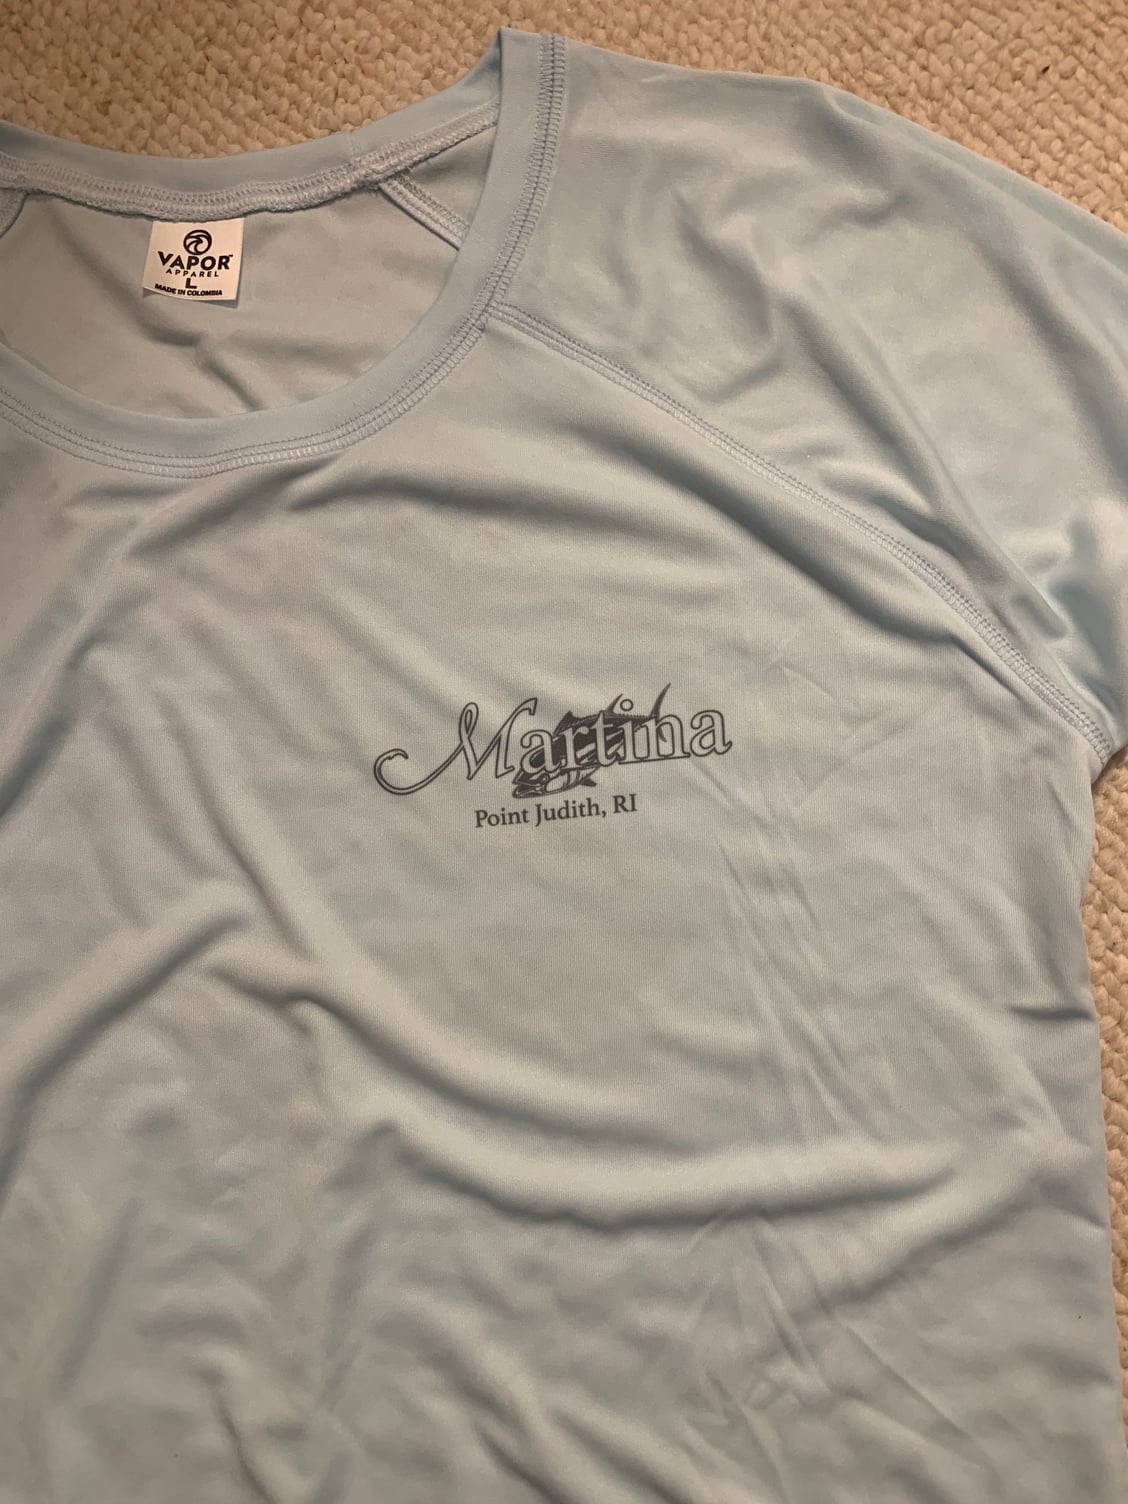 Custom Designed Performance Shirts, T-Shirts and Acc (Full Color Dye-Sub  AVAILABLE) - Page 4 - The Hull Truth - Boating and Fishing Forum